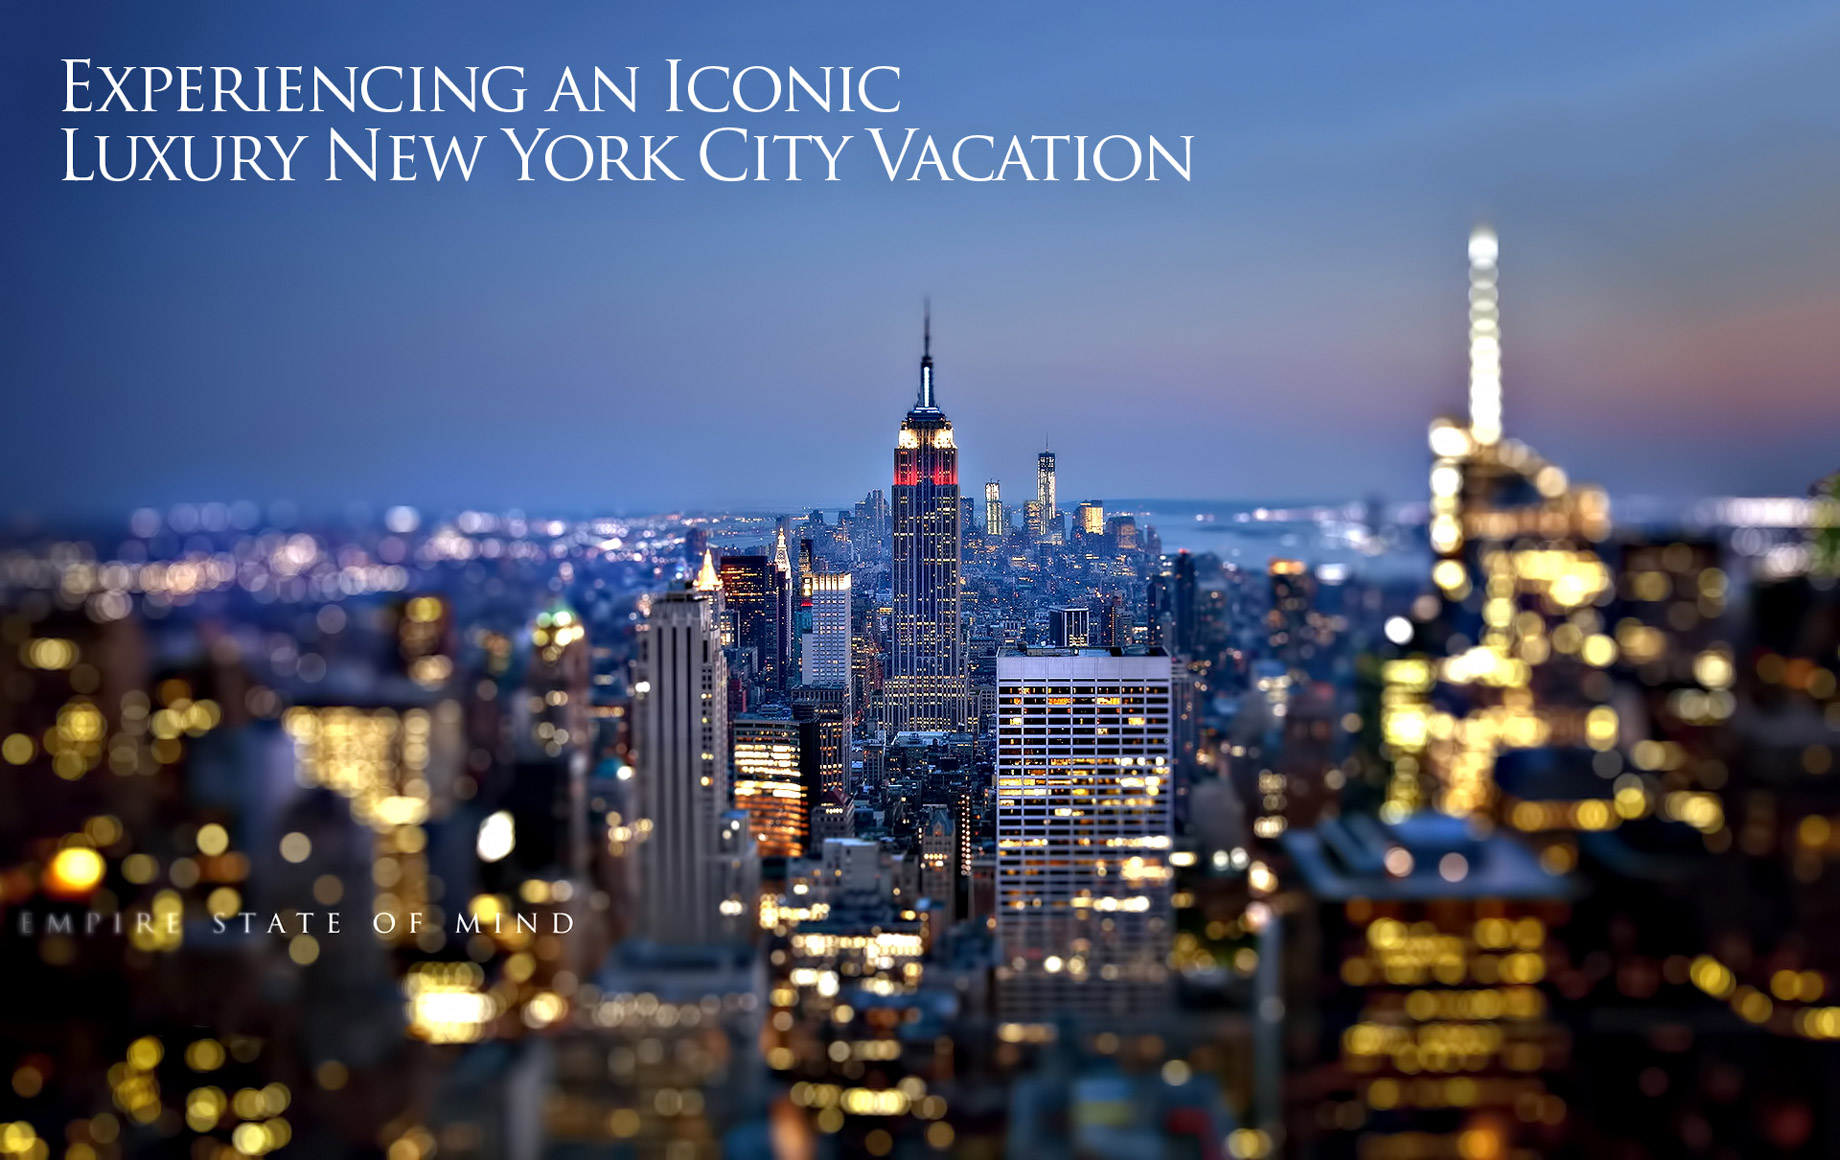 Empire State of Mind – Experiencing an Iconic Luxury New York City Vacation